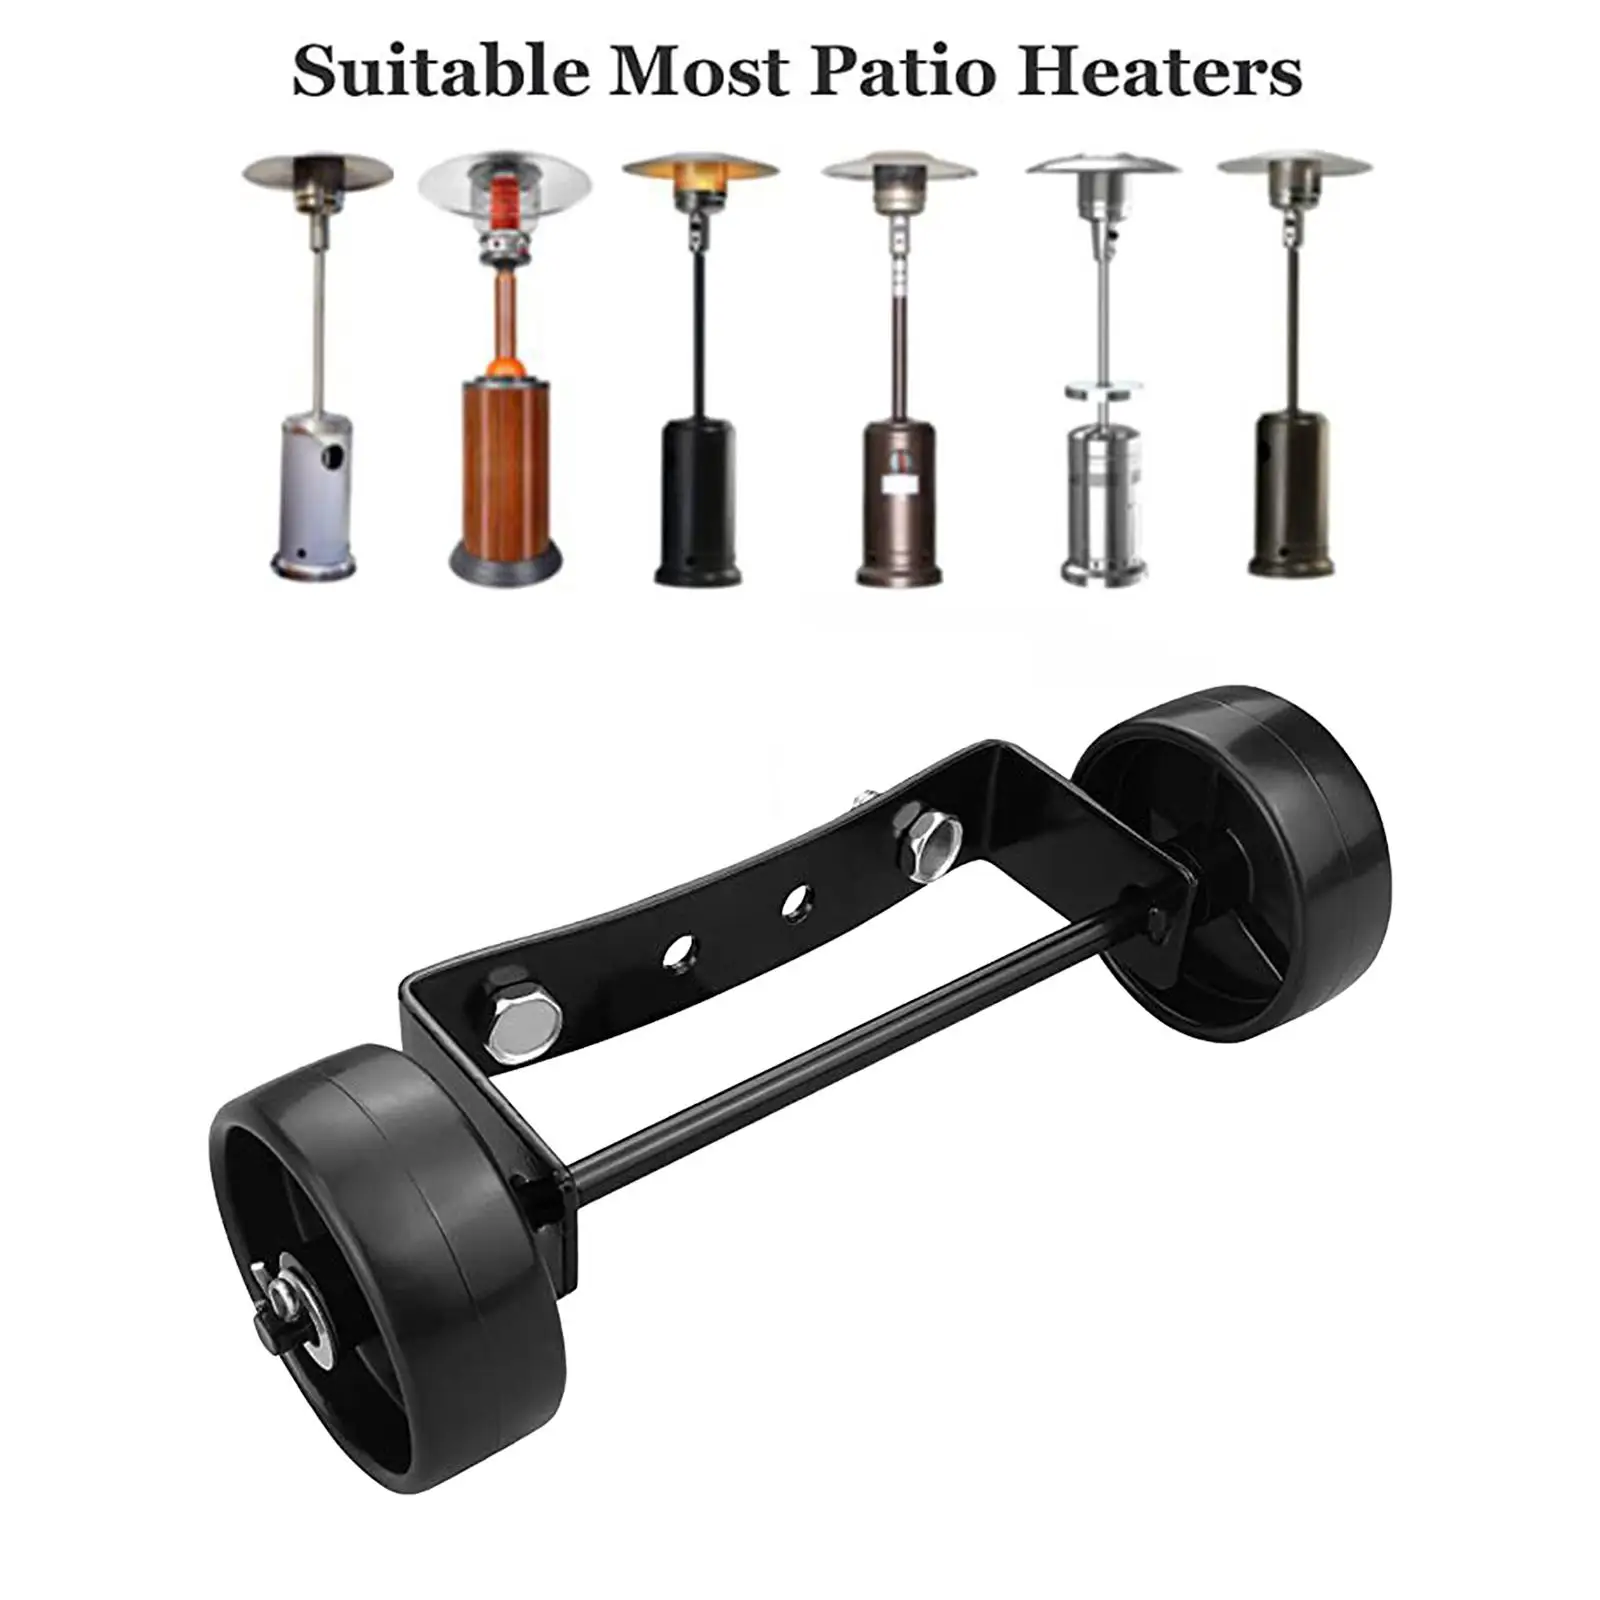 Patio Outdoor Heater Wheel Kit Patio Heater Pulley Movable Wheel Gas Patio Heater Replaces for High